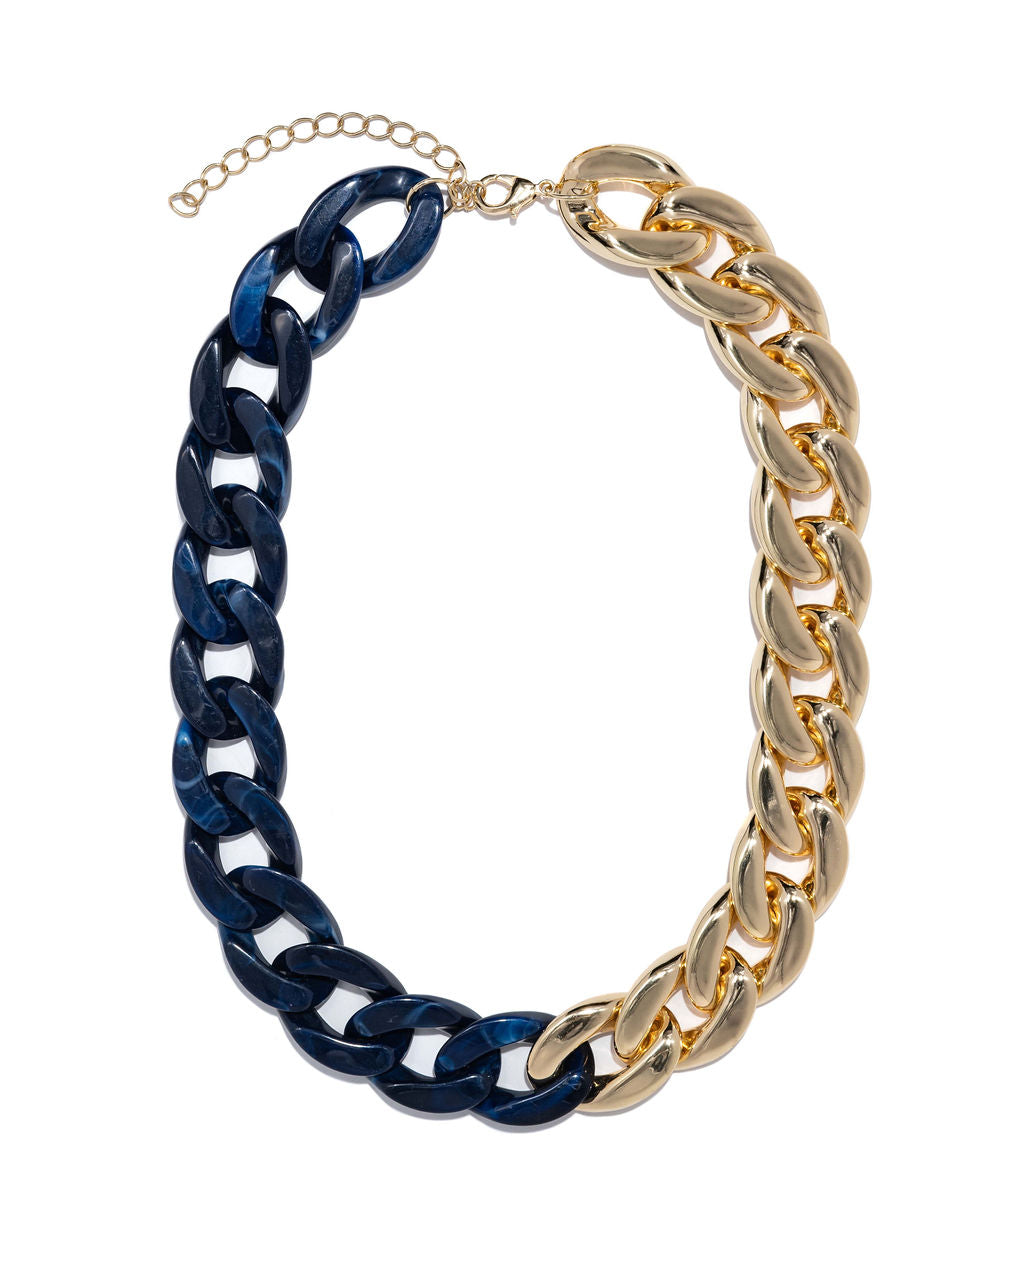 Constance Gold Chain Necklace - Navy PANN-001